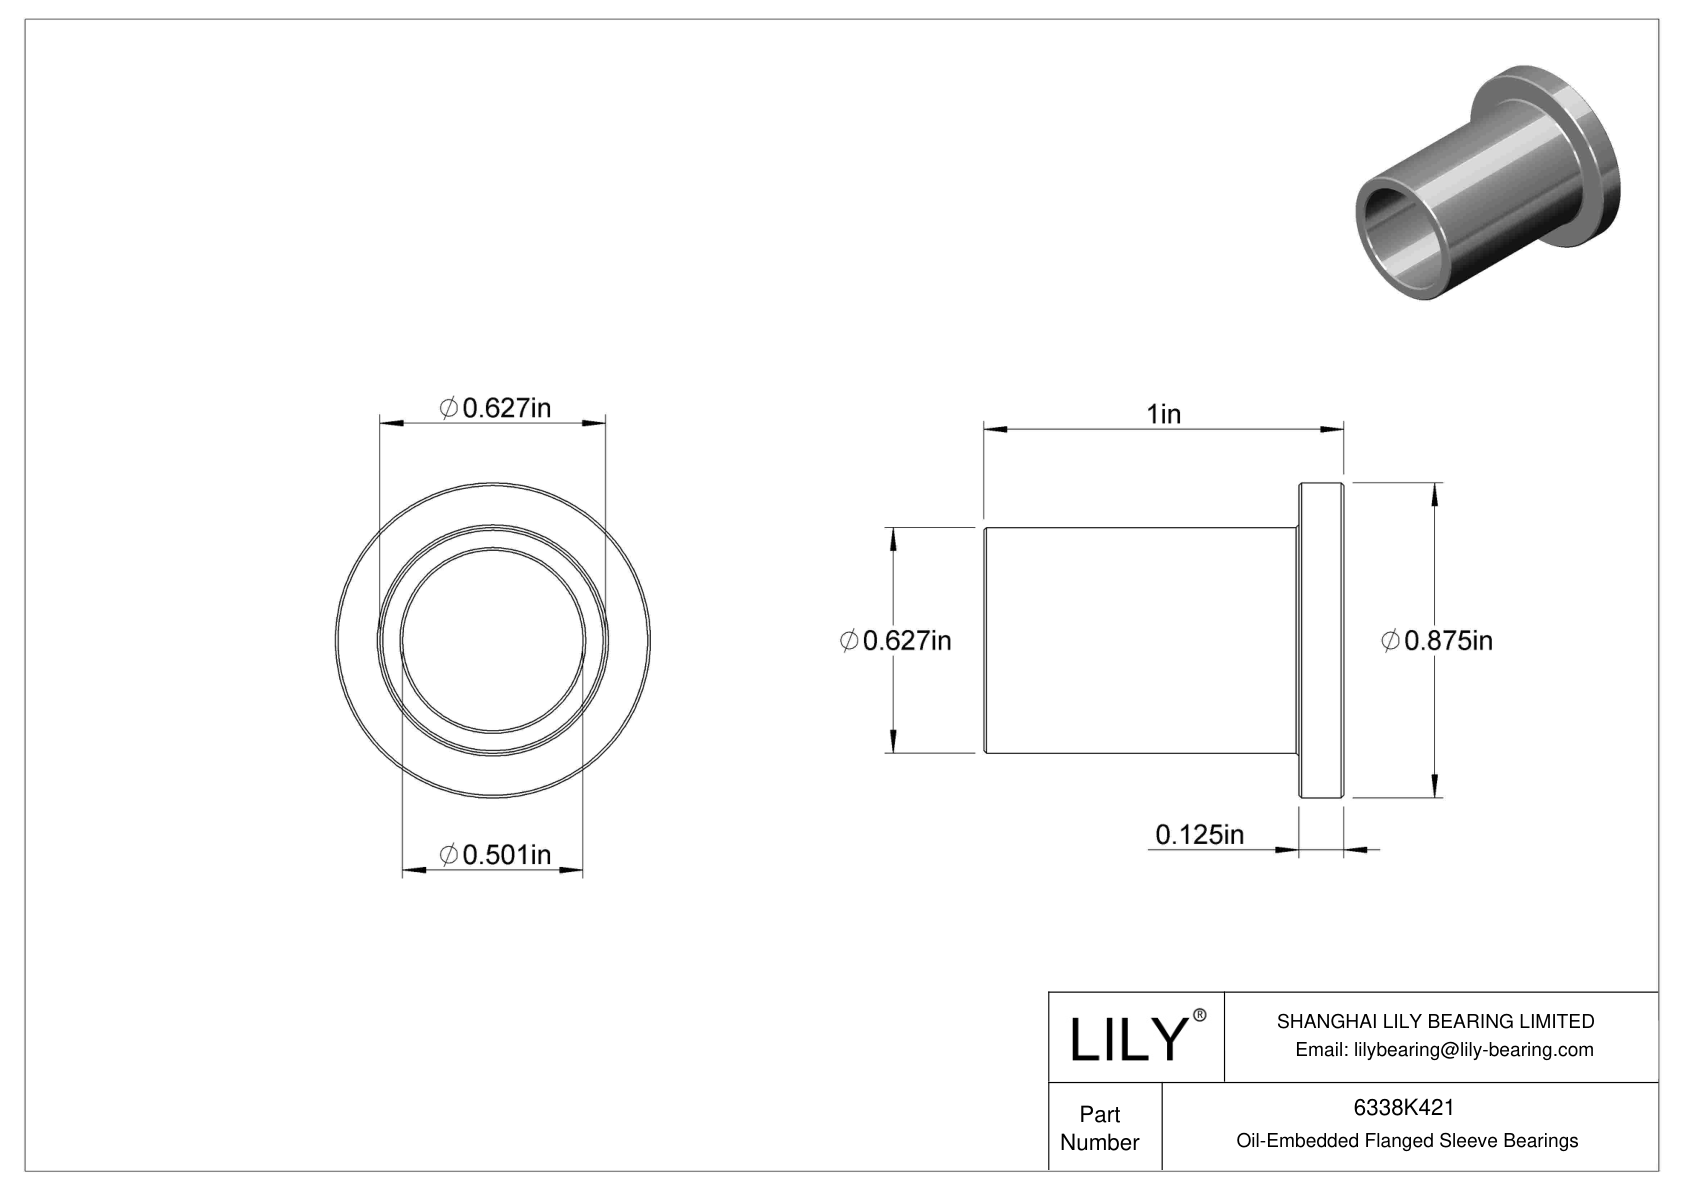 GDDIKECB Oil-Embedded Flanged Sleeve Bearings cad drawing